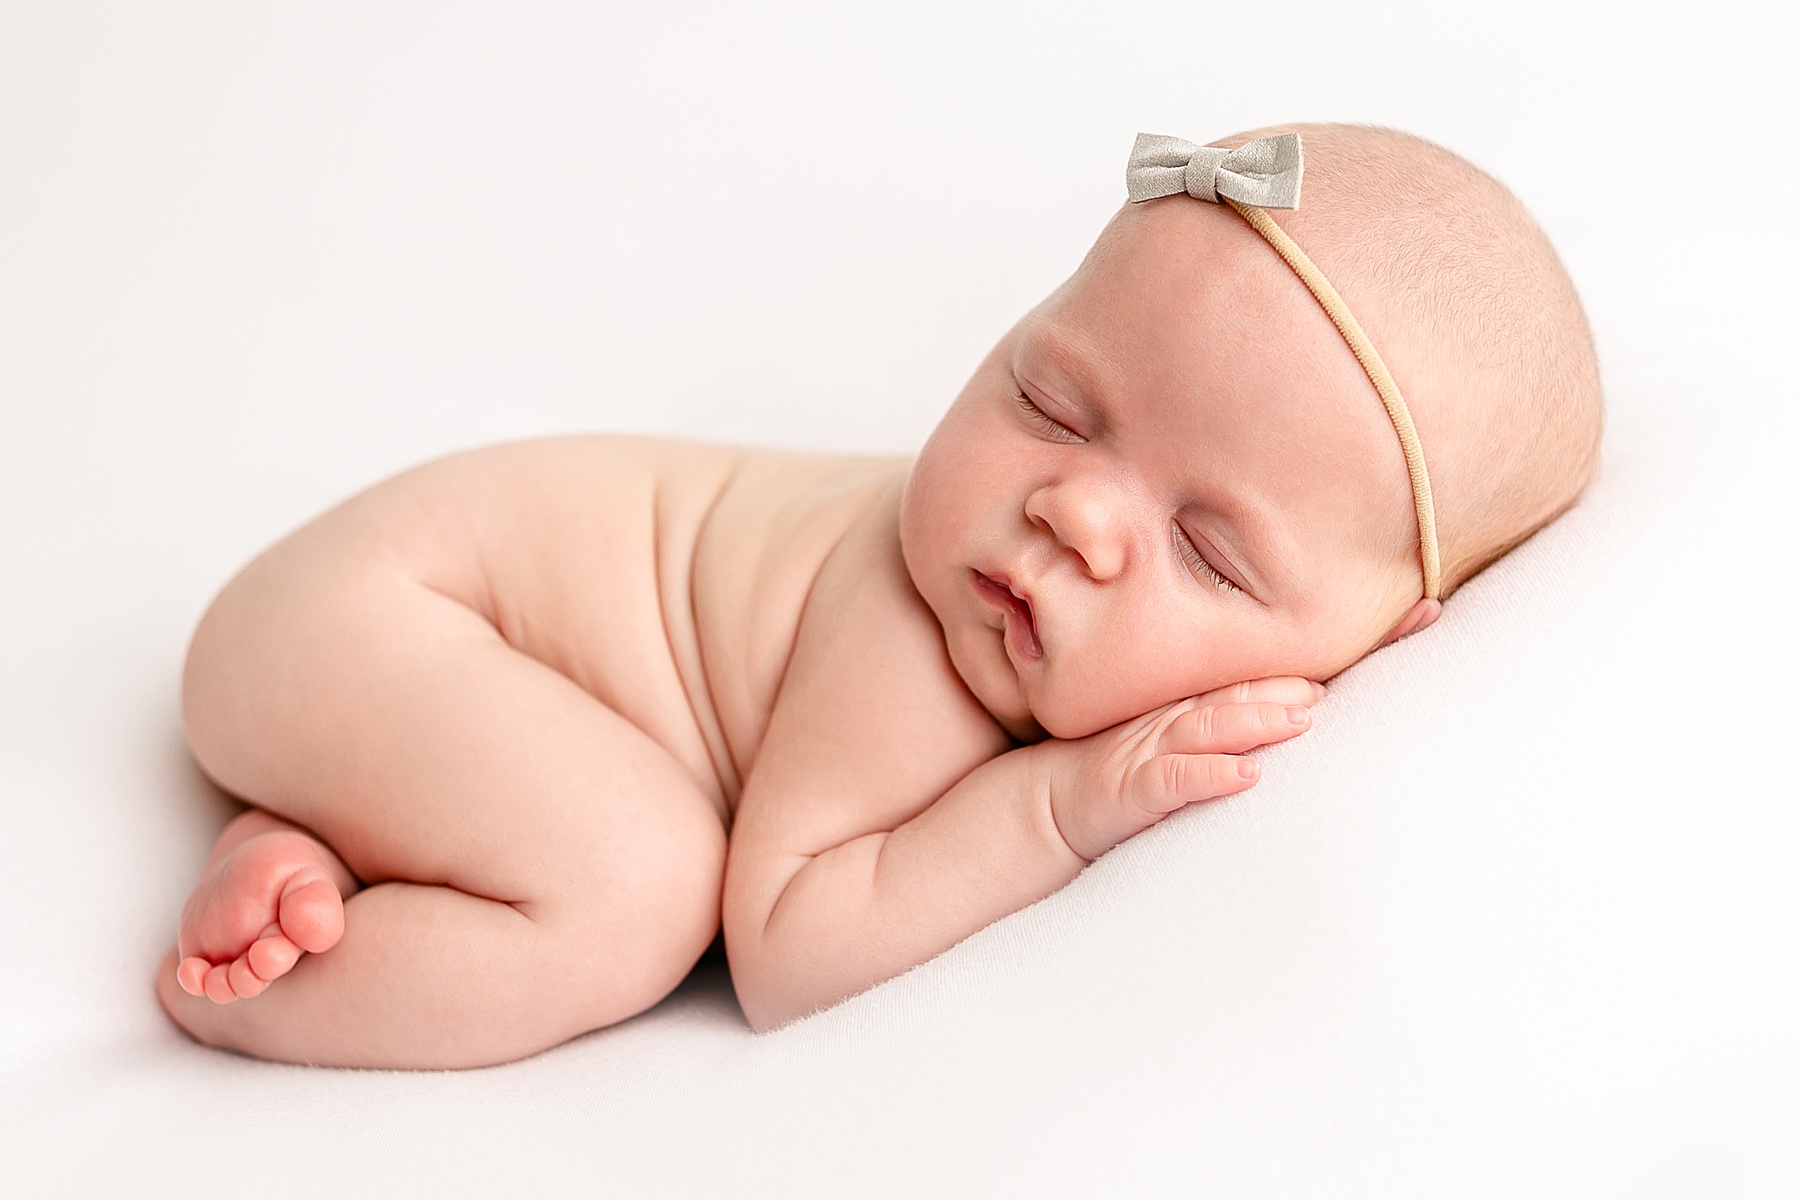 light-skinned baby curled up on white backdrop with minimalist grey bow on head - light and airy newborn photos portland oregon